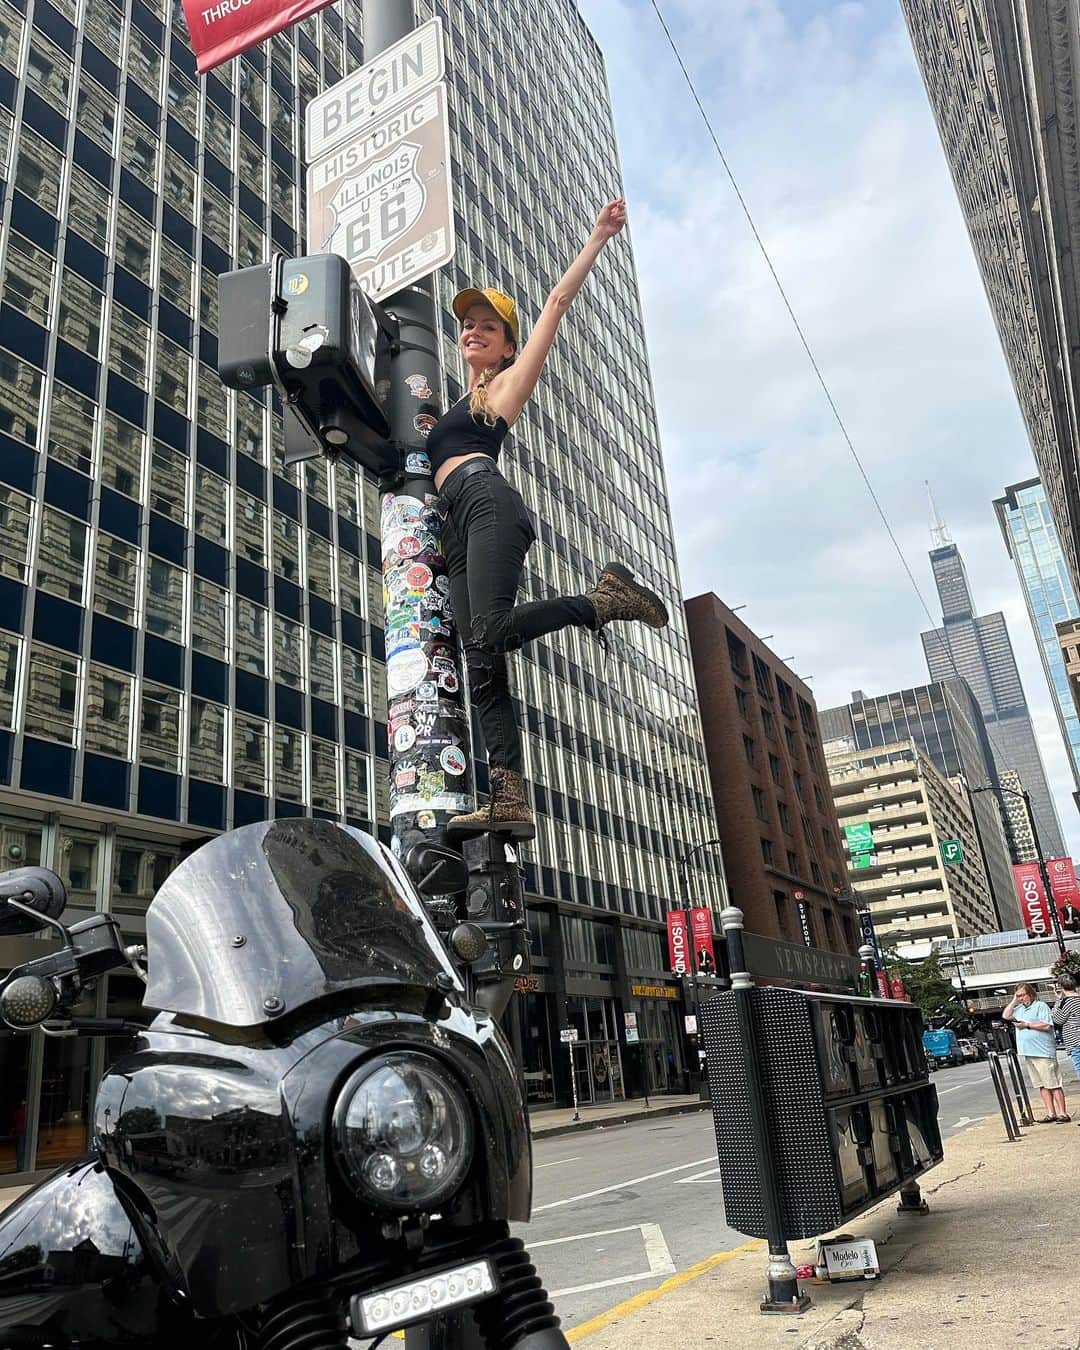 コーディー・レニー・キャメロンさんのインスタグラム写真 - (コーディー・レニー・キャメロンInstagram)「⚡️Day 9 Riding Route 66 for Charity  💥St Louis to Chicago, IL 💥Today: 315 miles, Total: 2292miles  Omg we made it!!! The last day was definitely the most challenging with sore muscles & traffic but super rewarding! We hadn’t really planned this last leg since it’s my home state so figured we’d wing it. We stopped at the Pink Elephant Antique Mall in Livingston, IL which had so many fun big statues, art, and obviously antiques! Then @jigger.la really wanted to see this brick road so we made our way to Auburn, IL and after what felt like an eternity we made it to the Thompson Hotel in Chicago where one of my best friends @cynthiamichelle08 welcomed us with @loumalnatis Chicago deep dish pizza and cokes to cheers with! The end of the road, the beginning of a dream! Our Route 66 run is complete but we’re still traveling and raising money for Choppers’s Charity till we get back to LA! Next stop: my college town Champaign, IL.   Shoutout to the crew @jigger.la & @pontiuspilot - this wouldn’t have been possible without y’all! Plus every single person that helped along the way, planned events, filmed, reposted, donated, and showed up for us! Huge freakin thank you!!!   Today’s ride sponsored by @creatorsinc managing & growing the world’s most influential content creators & celebrities.   #ShiftGearsSaveLives #route66 #chicagoillinois #route66illinois #pinkelephant #navypier #stlouisarch」9月17日 4時24分 - heyitscodee